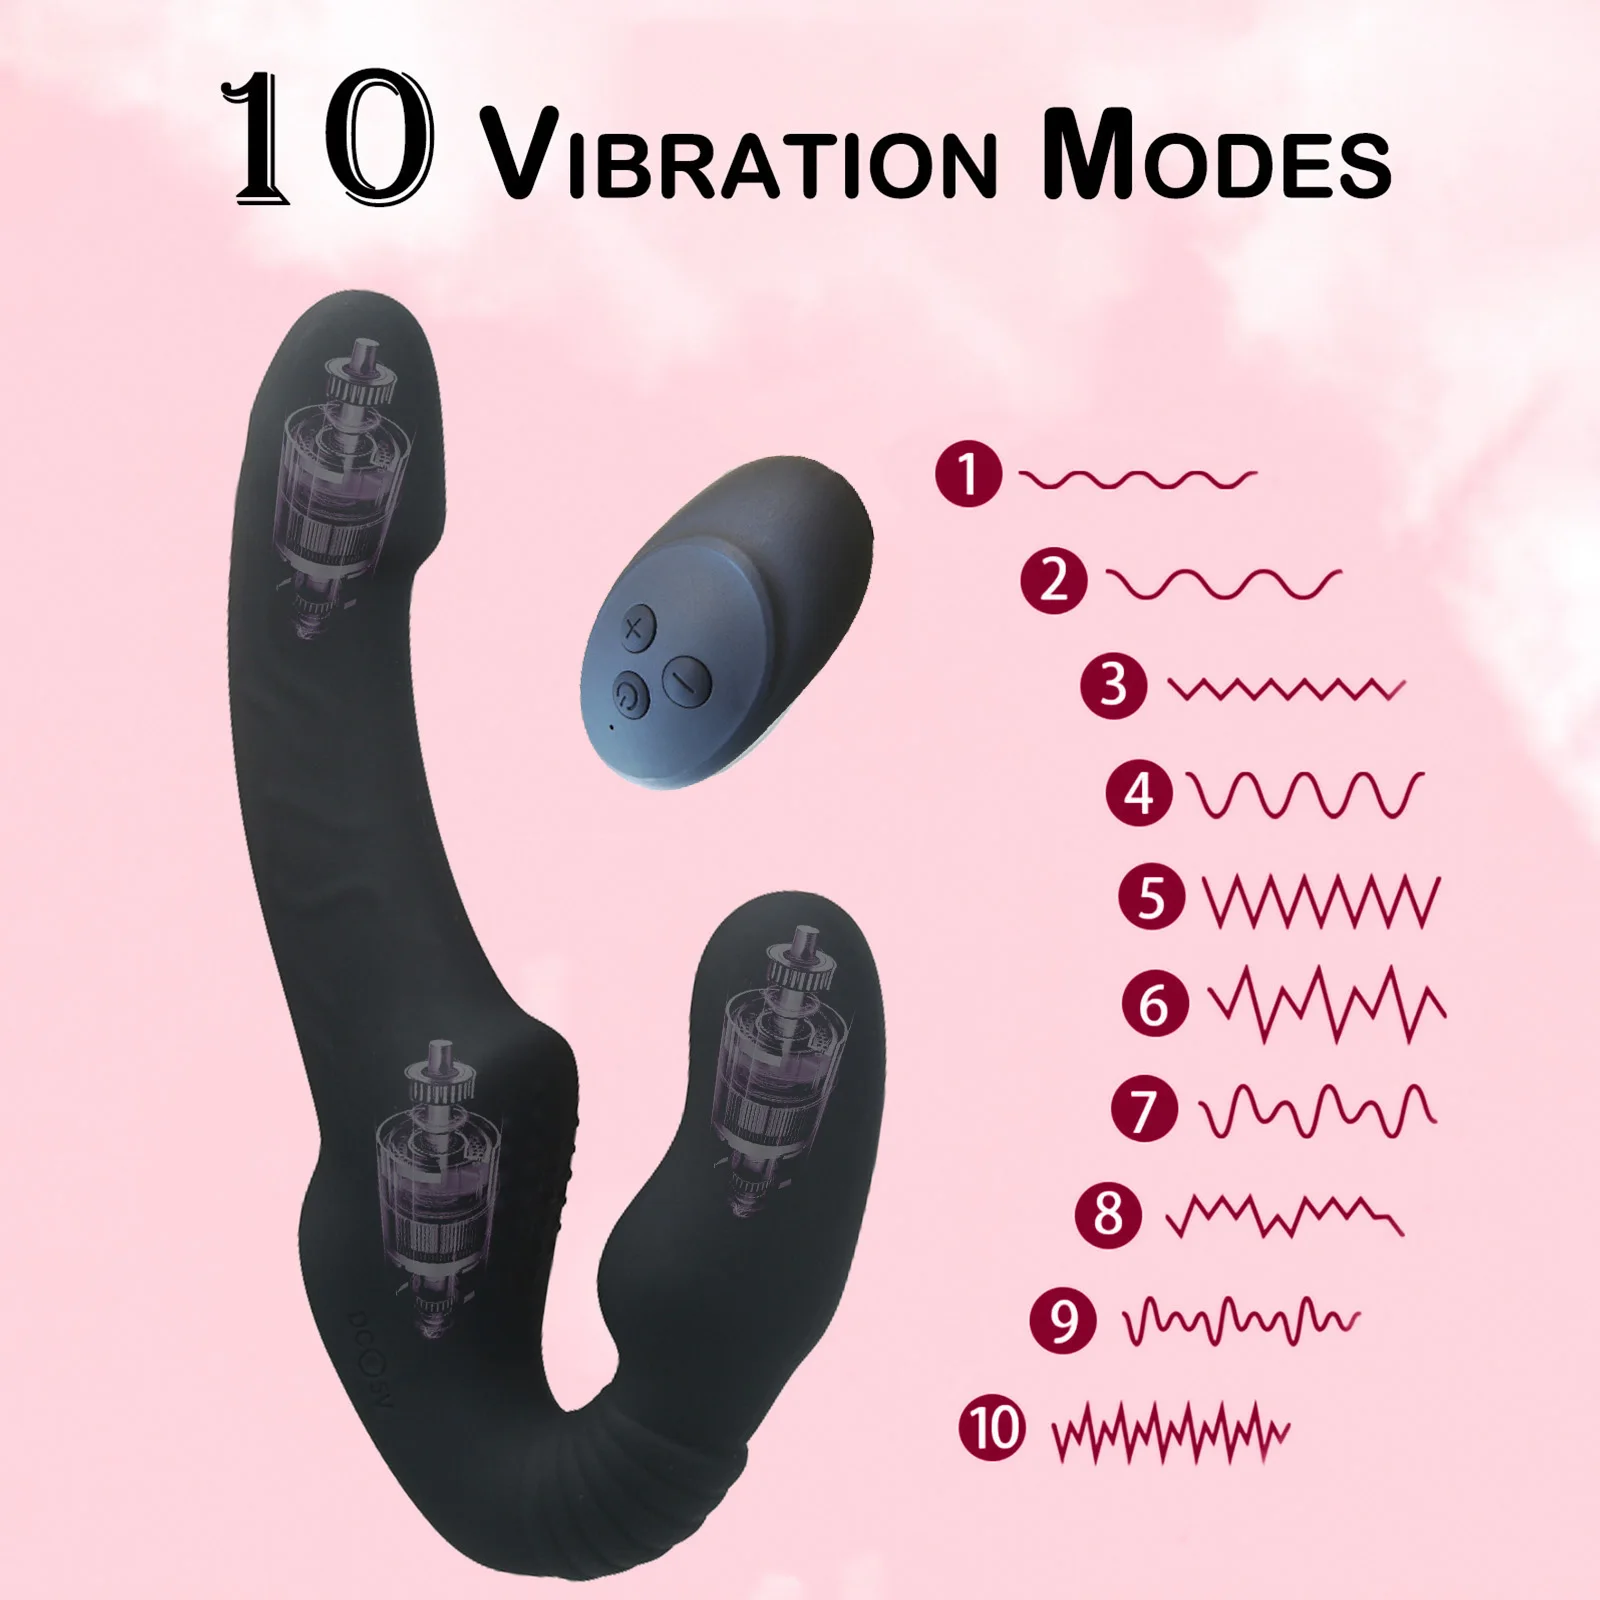 Strapless Strap-on Dildos Vibrator with Remote Control for Women Lesbian Couples, G Spot Sex Toys With Clitoris Stimulator Sex Toys For Women cb5feb1b7314637725a2e7: L20-Black-Panty|L20-Pink-Panty